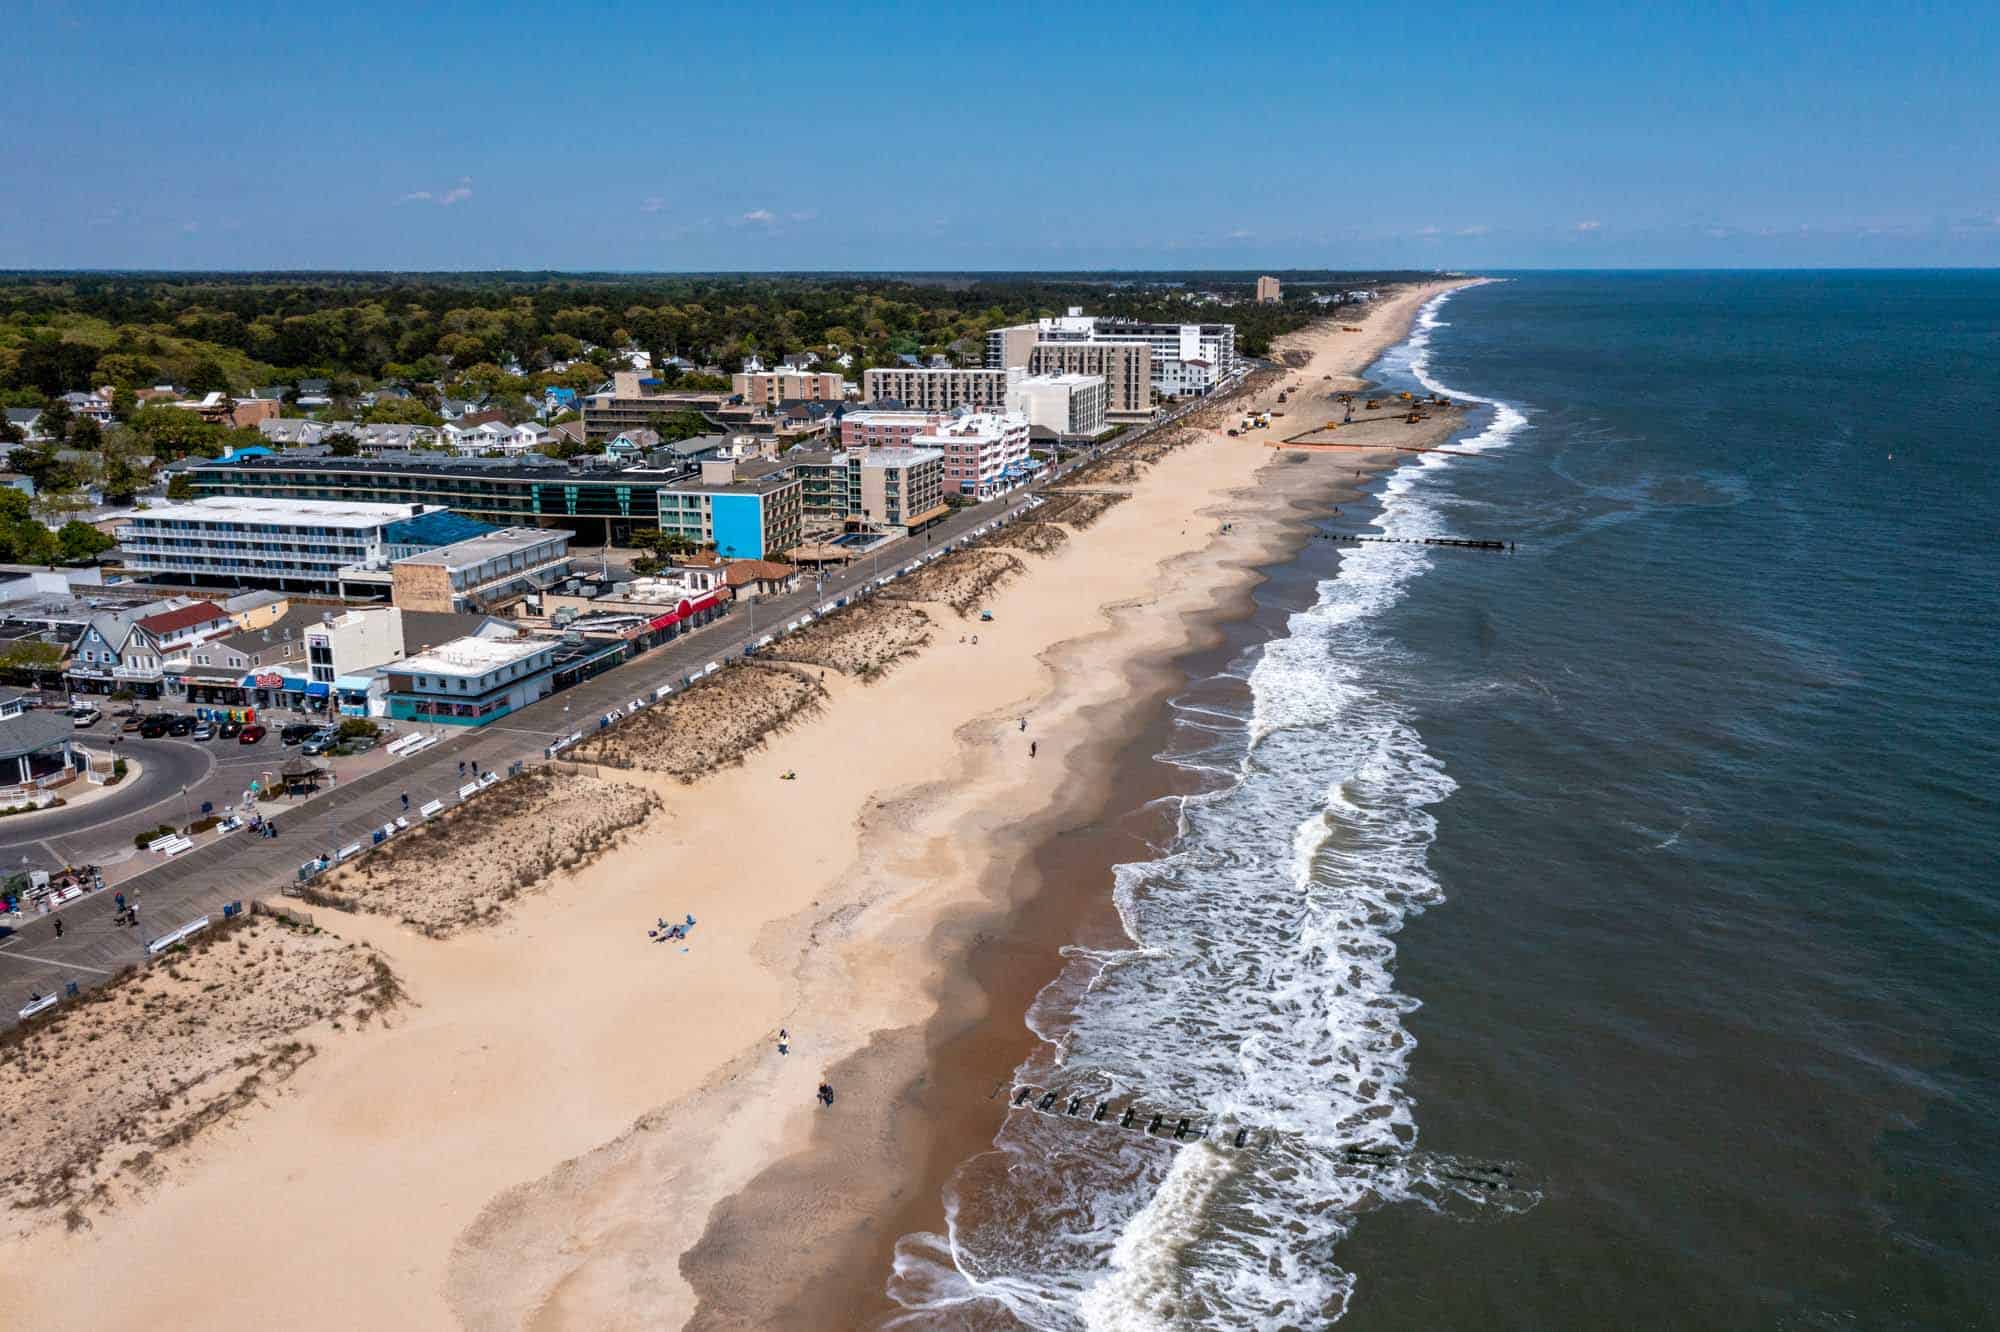 Overhead view of the ocean, buildings along the coast, and Rehoboth Beach